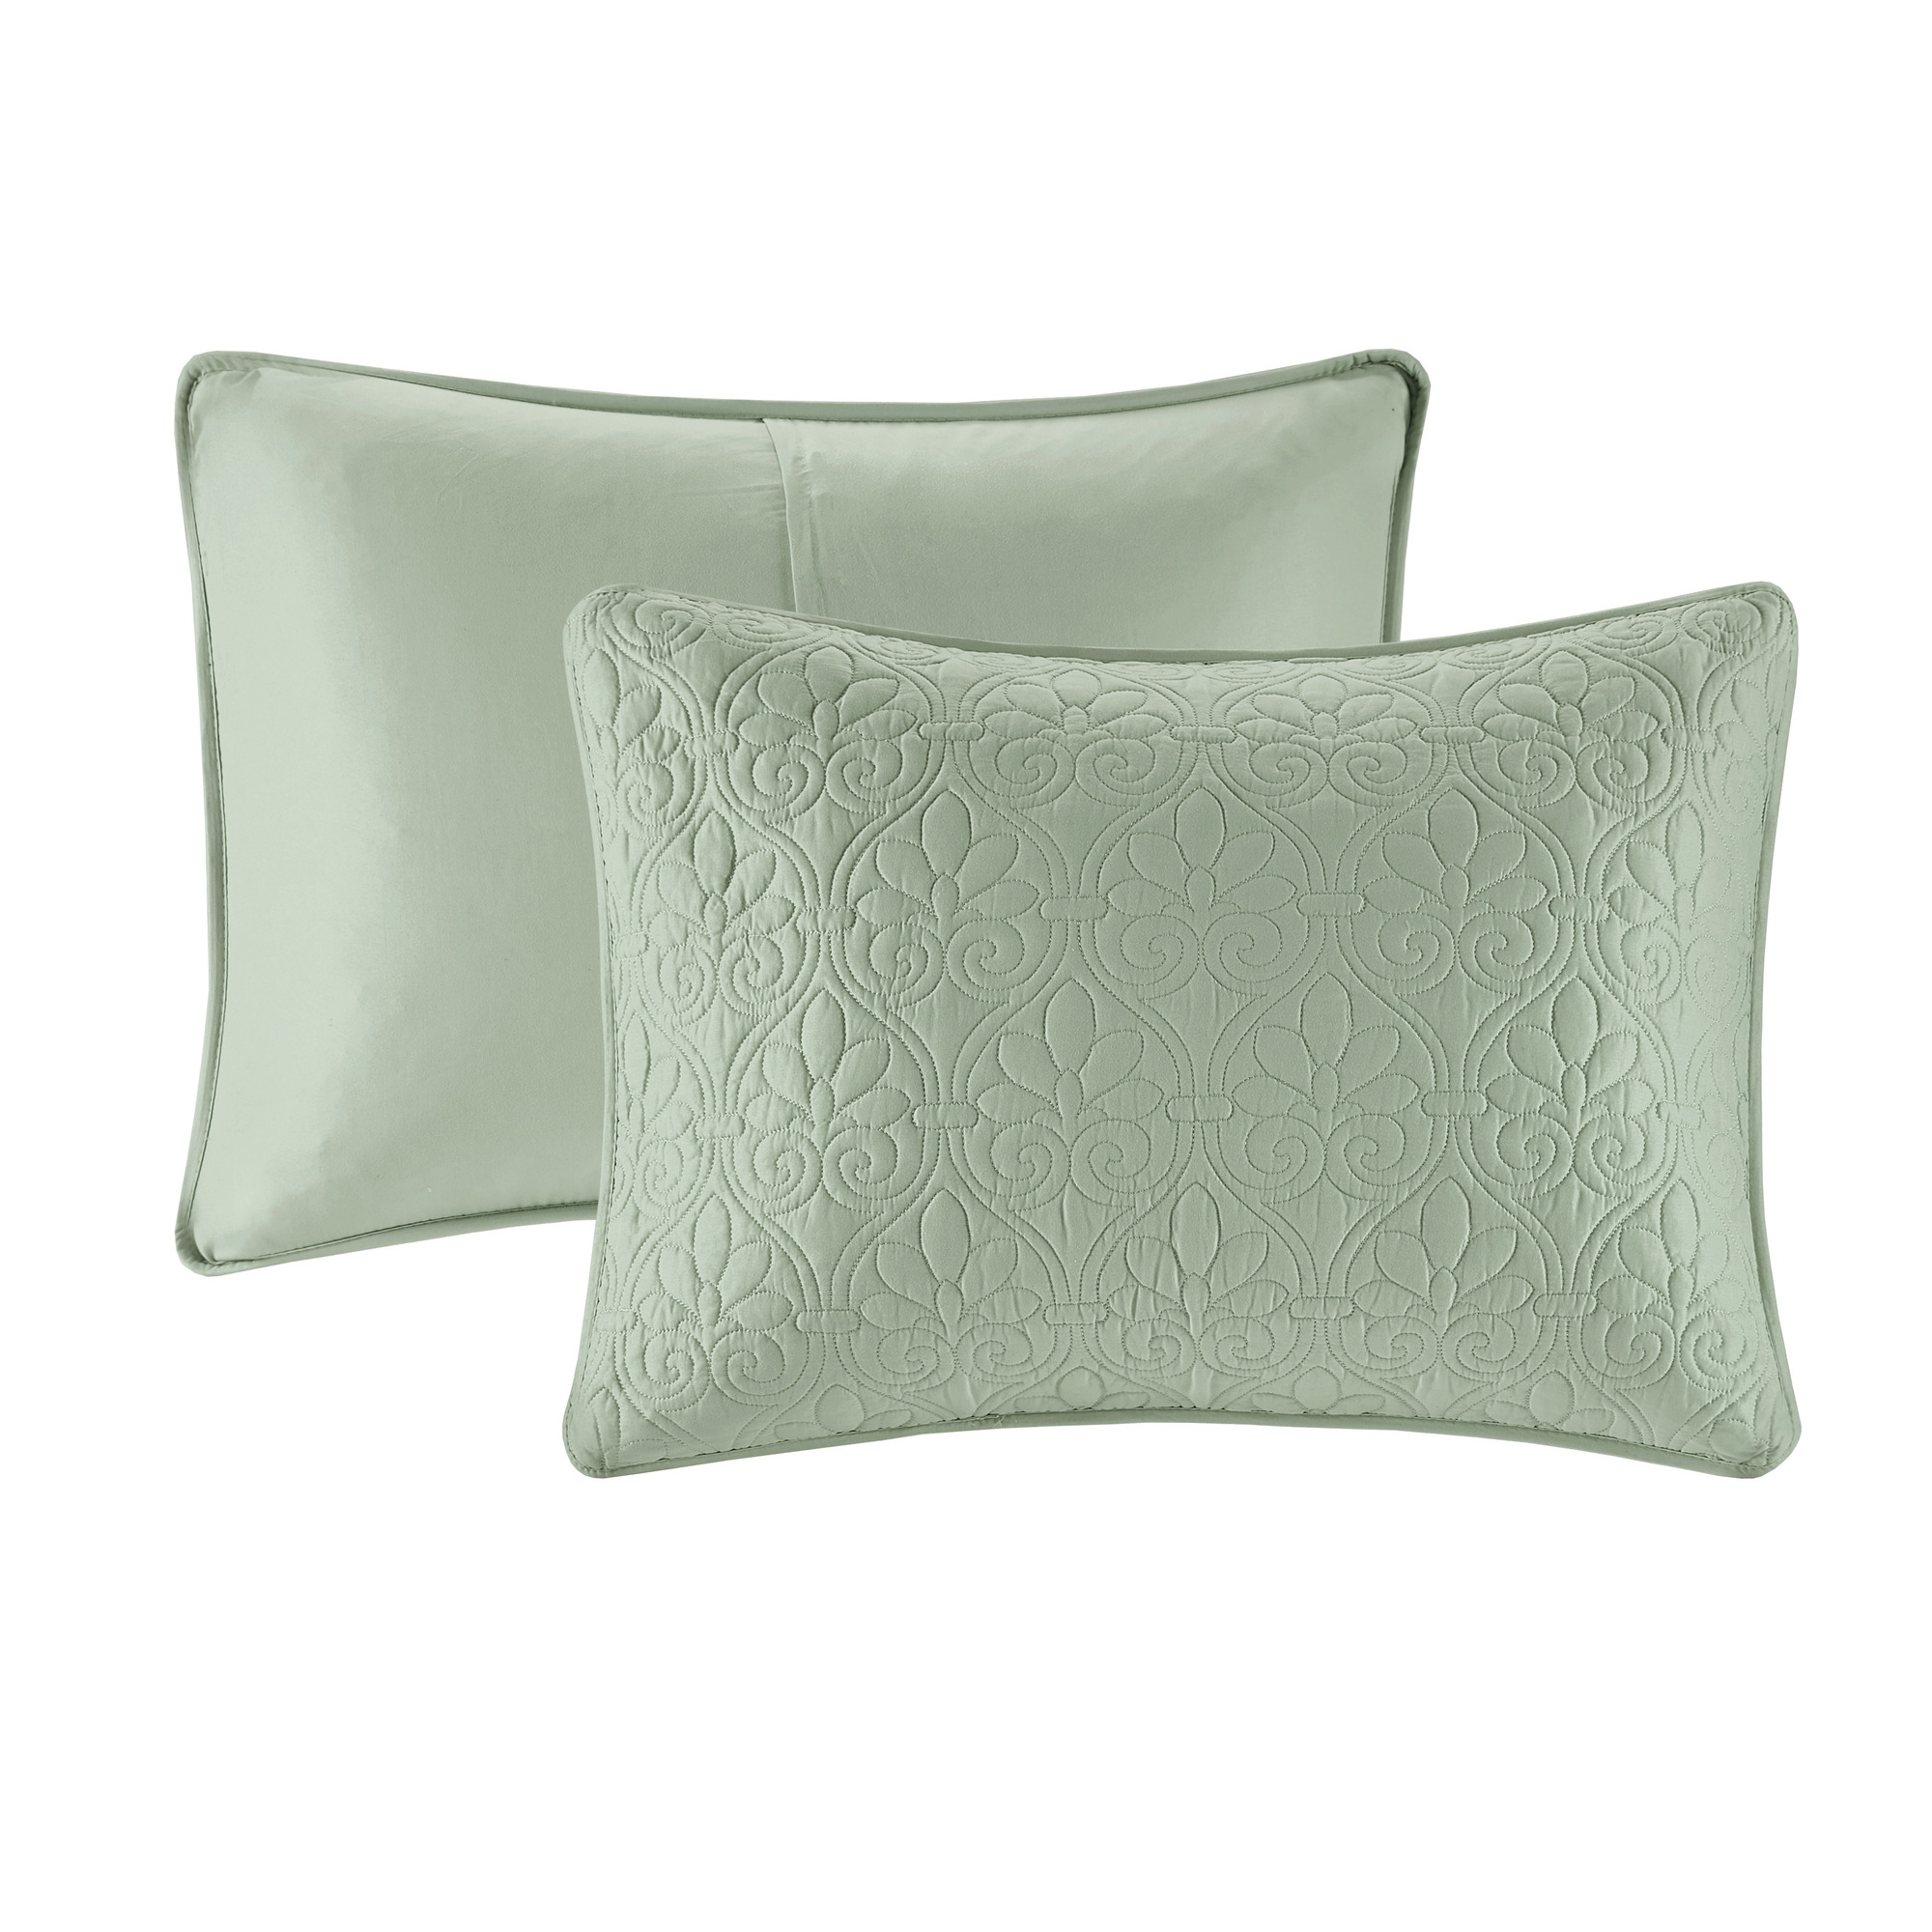 Home Essence Vancouver Super Soft Reversible Coverlet Set, Green, Full/Queen - image 5 of 12